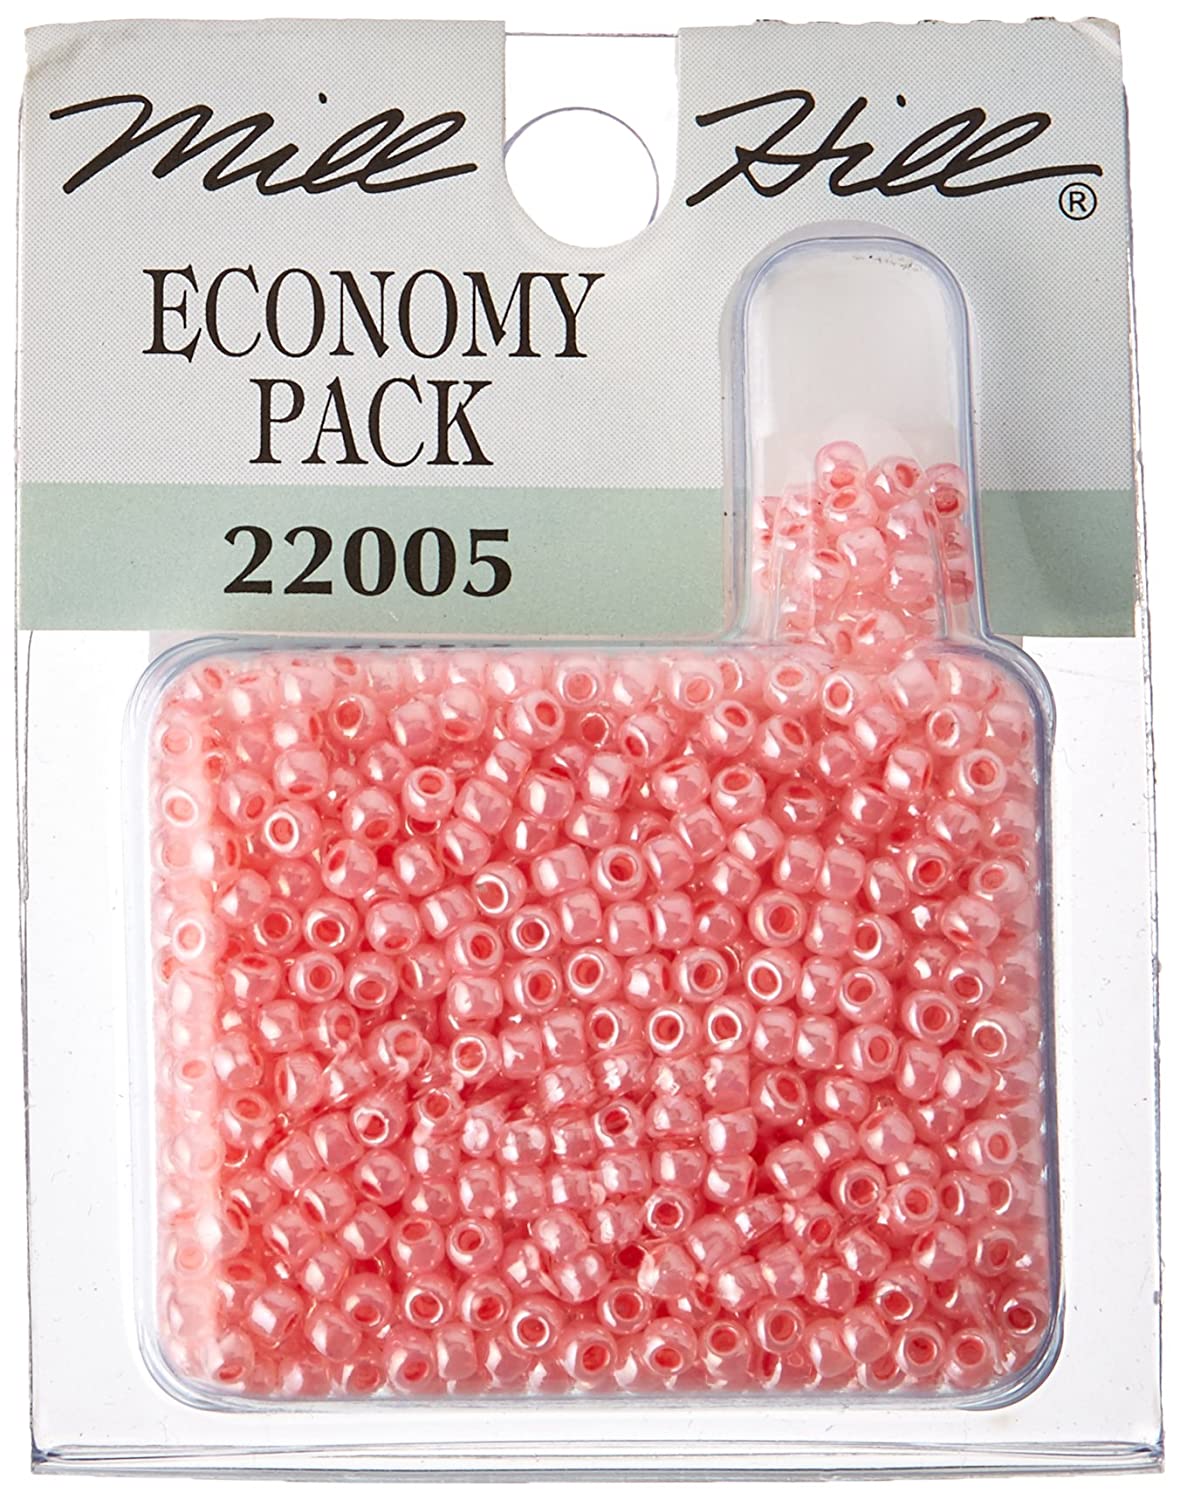 Mill HIll Economy Pack 22005 Dusty Rose